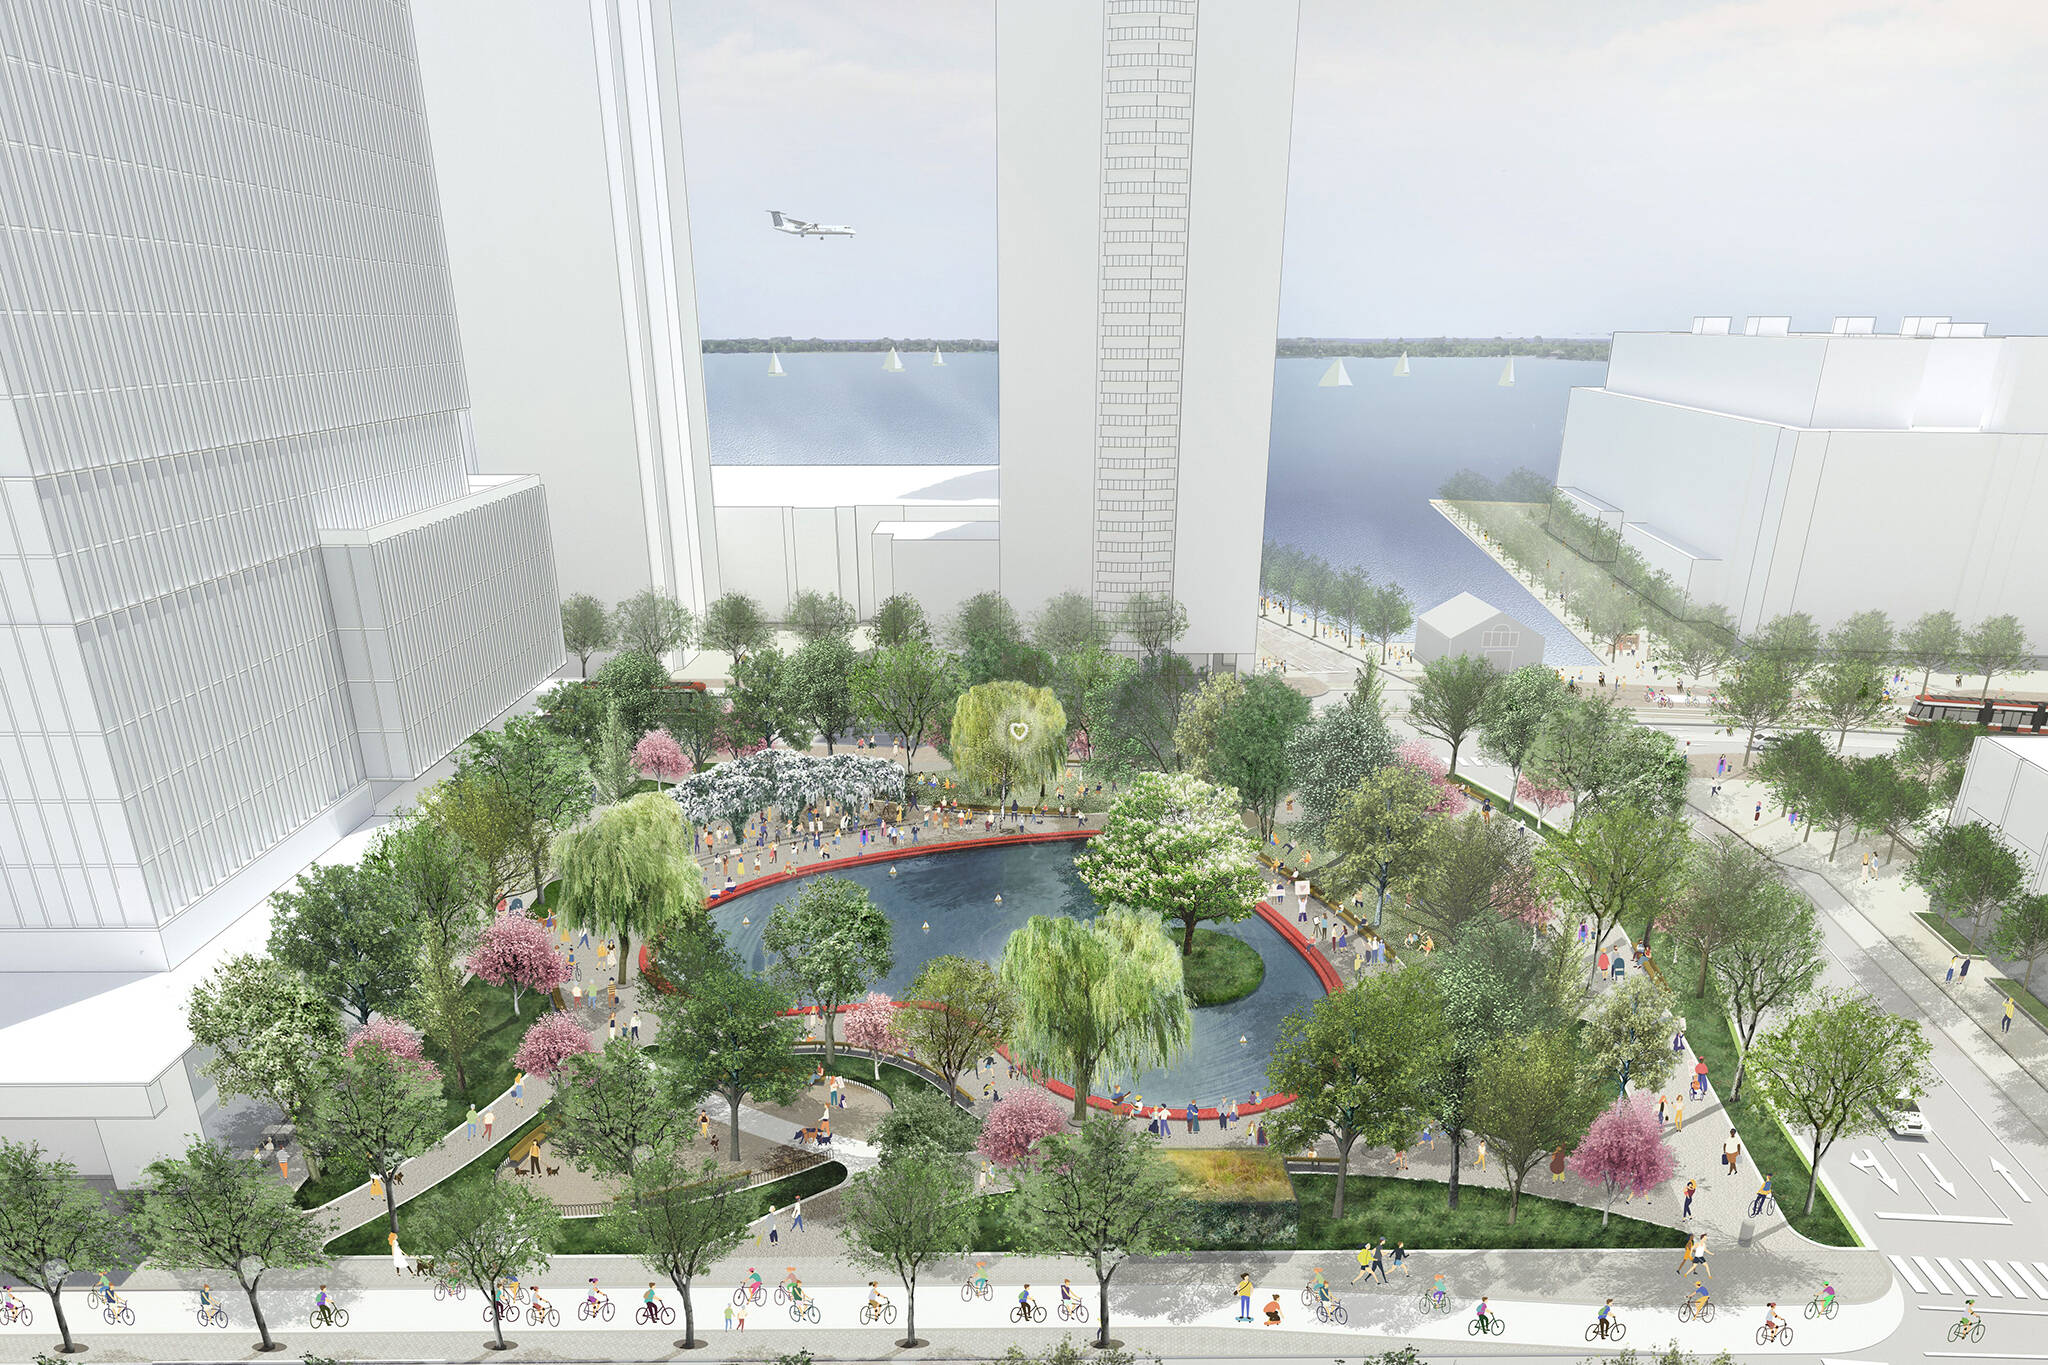 This is what Toronto's new Love Park will look like